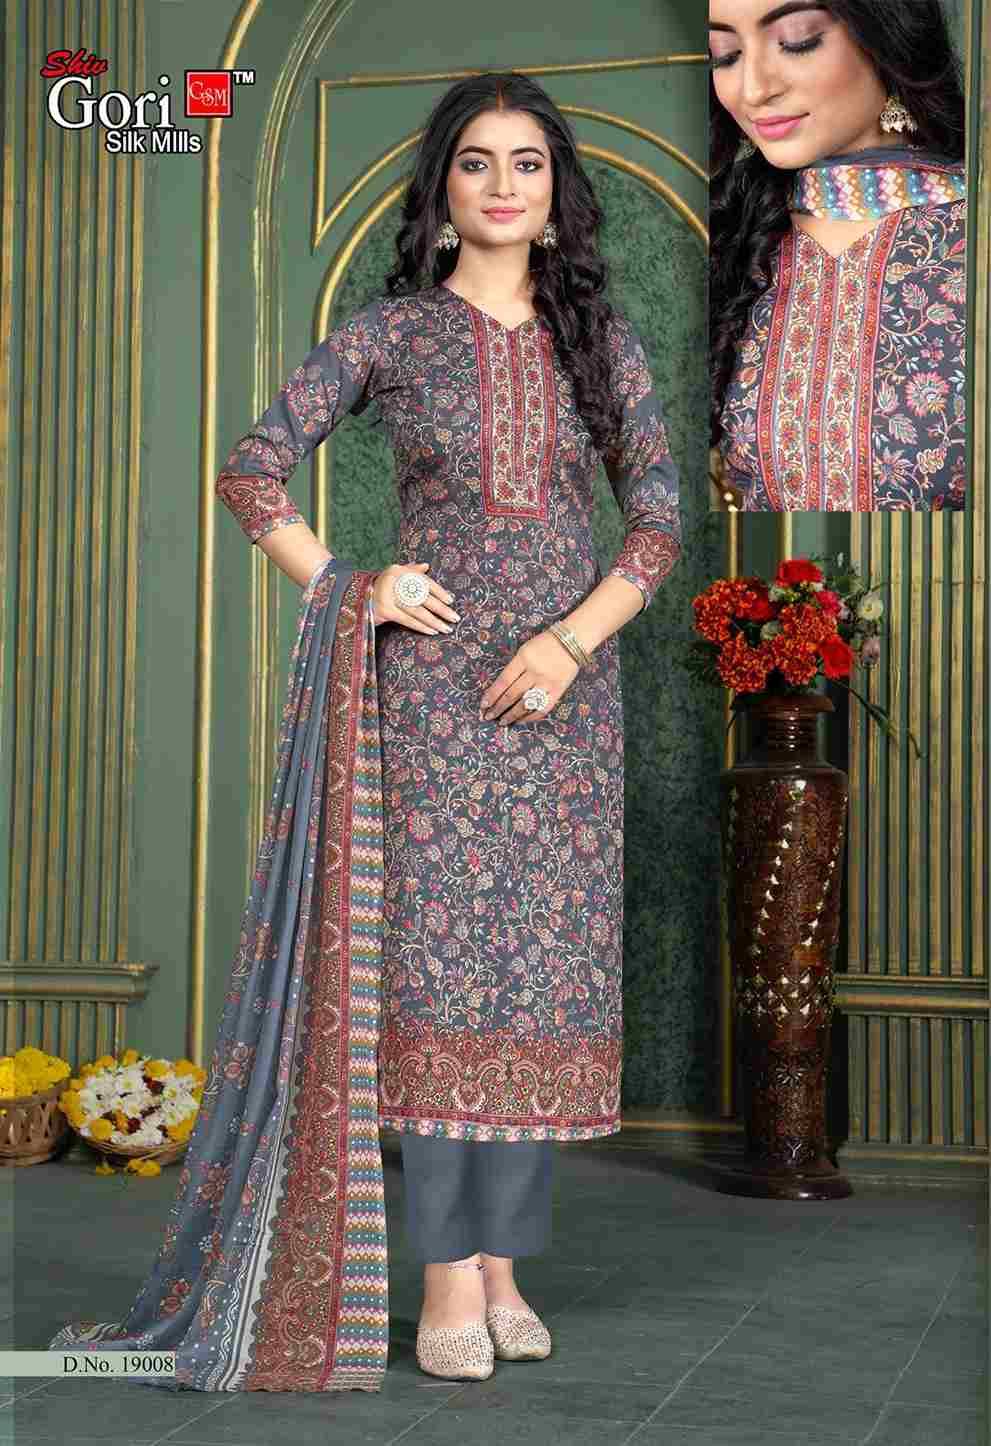 Pakizaa Vol-19 By Shiv Gori Silk Mills 19001 To 19012 Series Beautiful Festive Suits Colorful Stylish Fancy Casual Wear & Ethnic Wear Pure Cotton Dresses At Wholesale Price